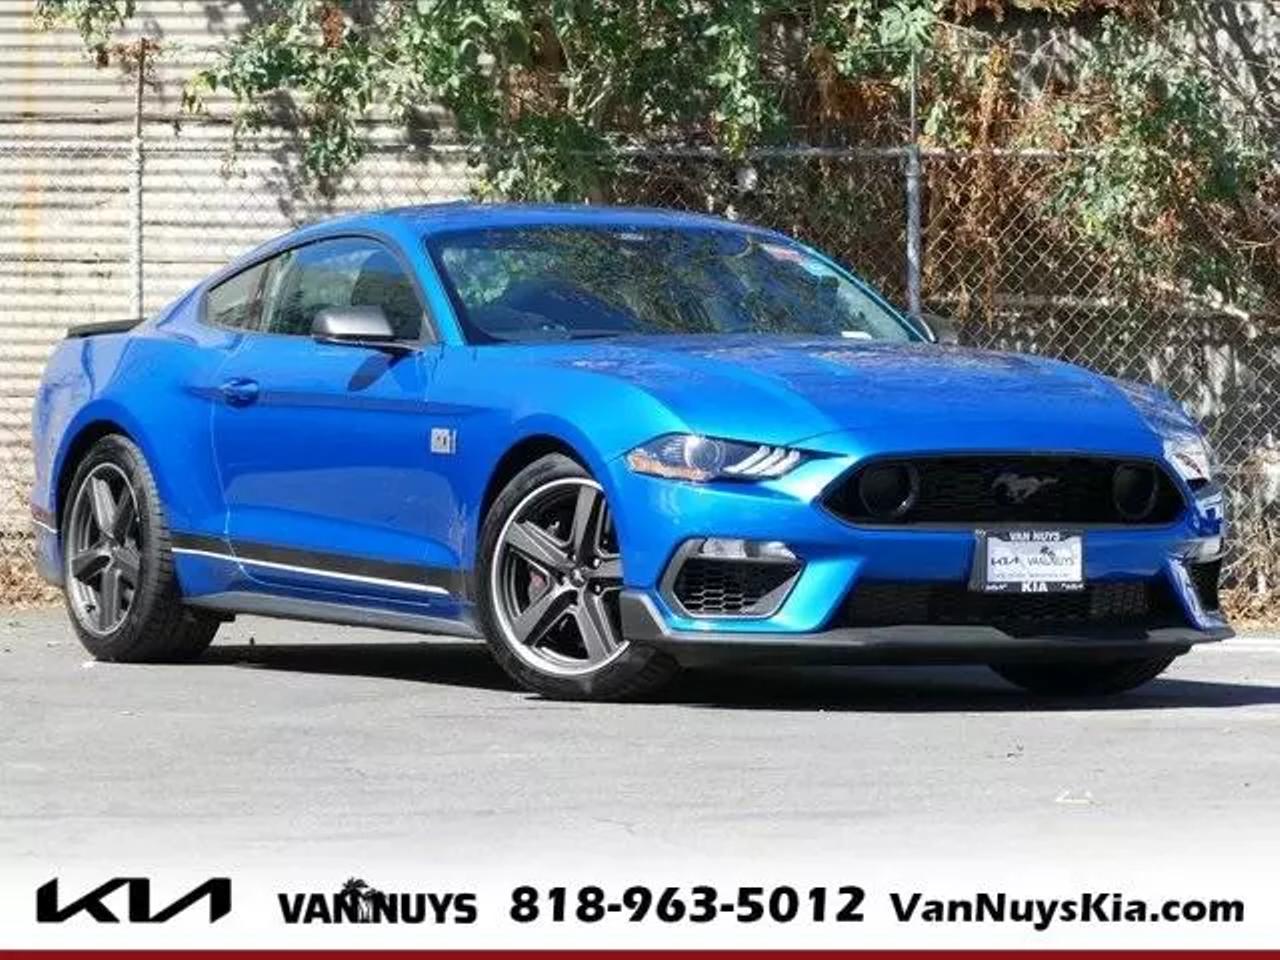 2021 Ford Mustang Mach 1 Coupe